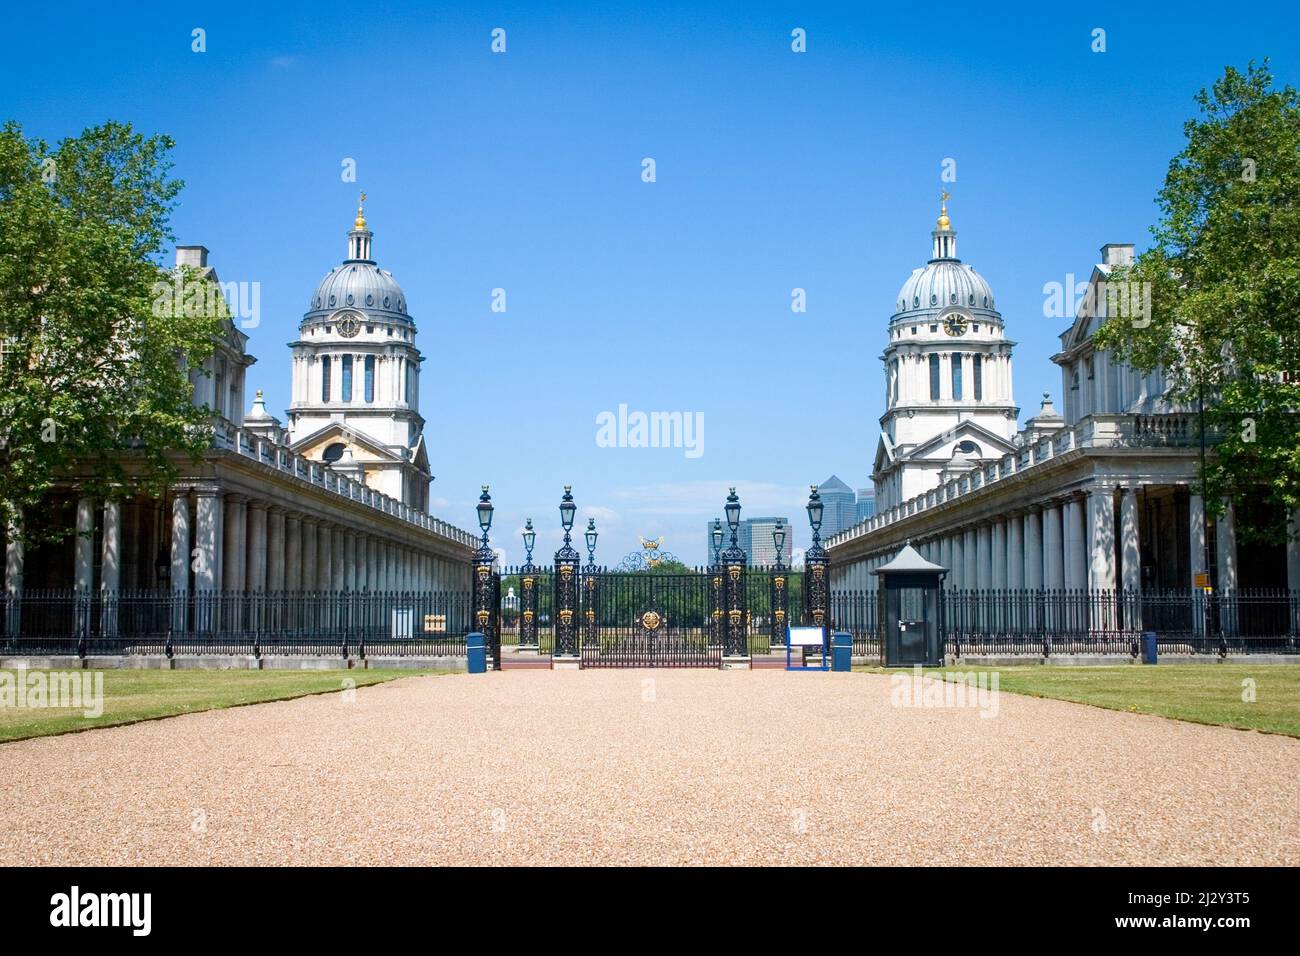 Old Royal Naval College, Greenwich, London, UK. A view of the Sir Christopher Wren designed landmark now part of the University of Greenwich. Stock Photo